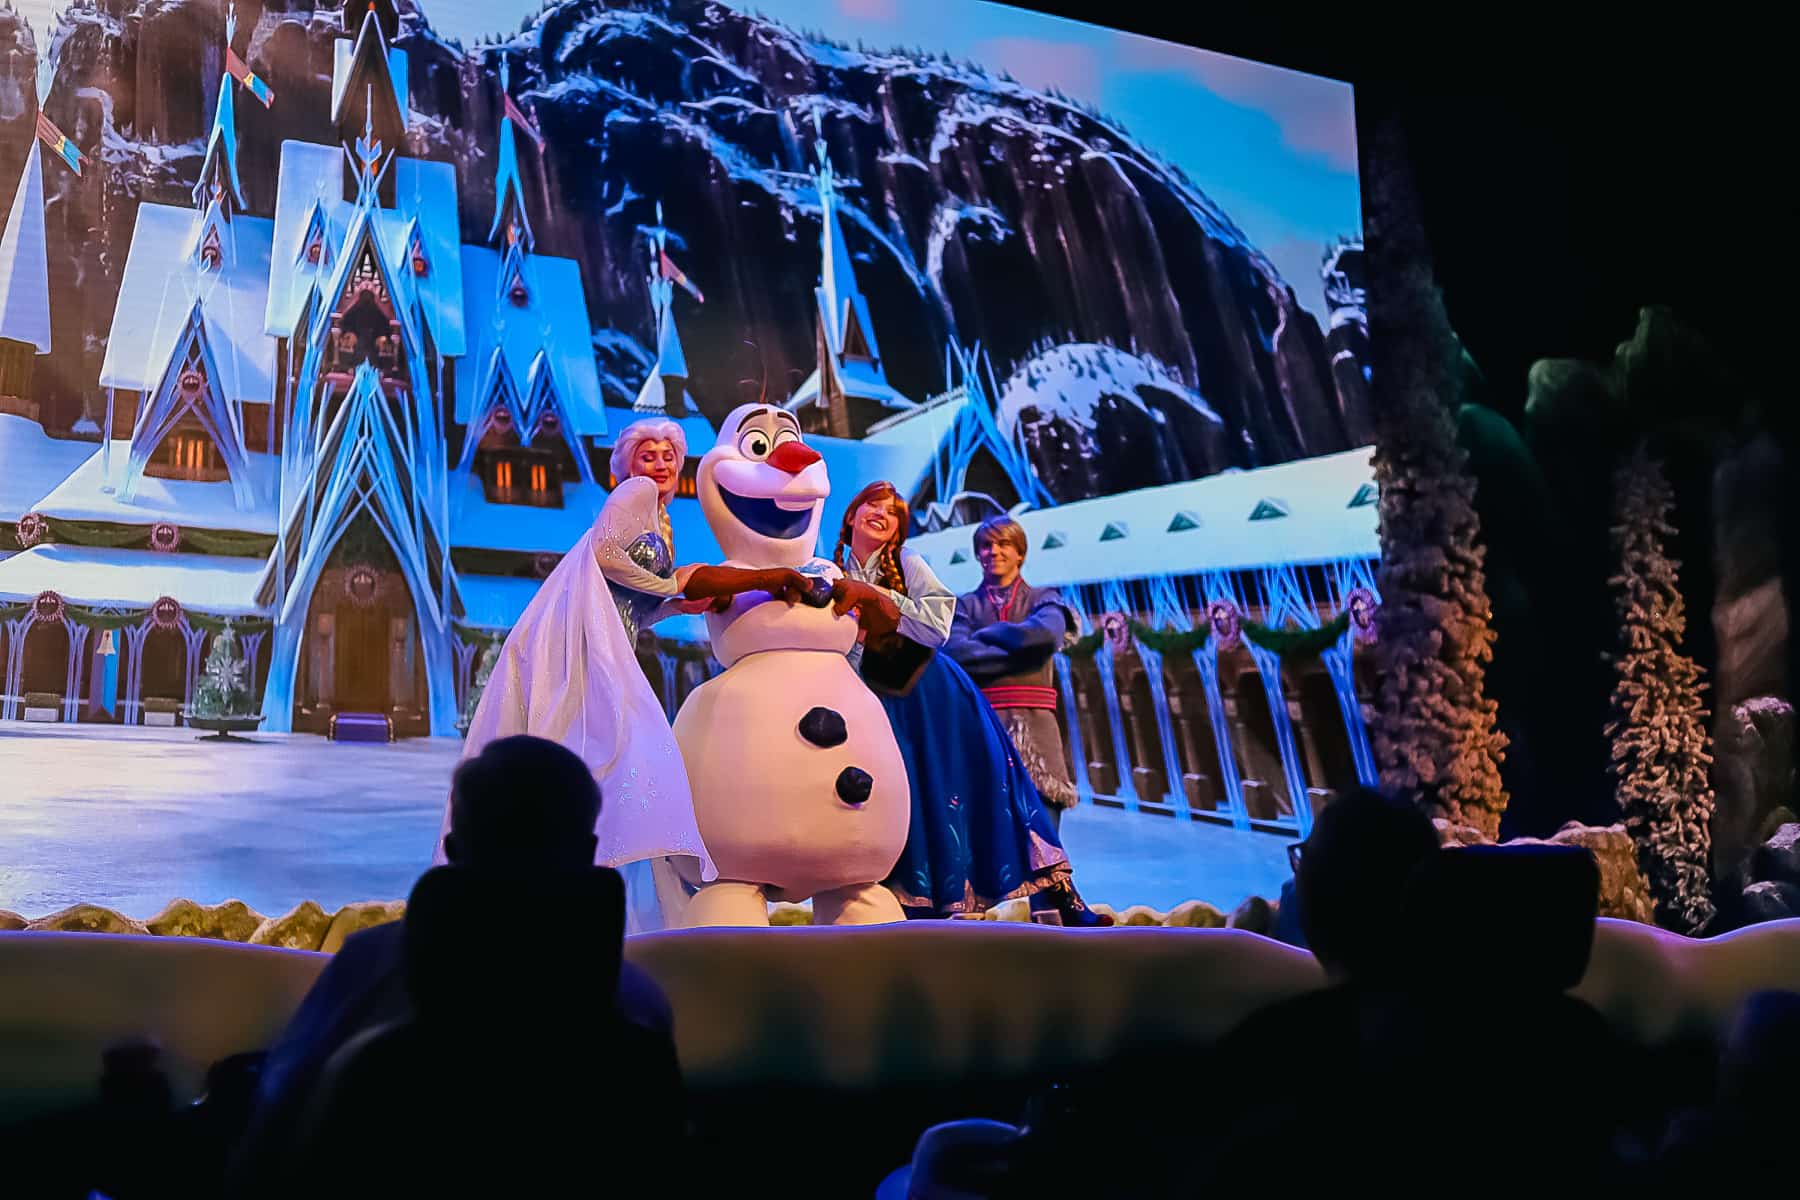 Anna and Elsa hugging Olaf on stage 